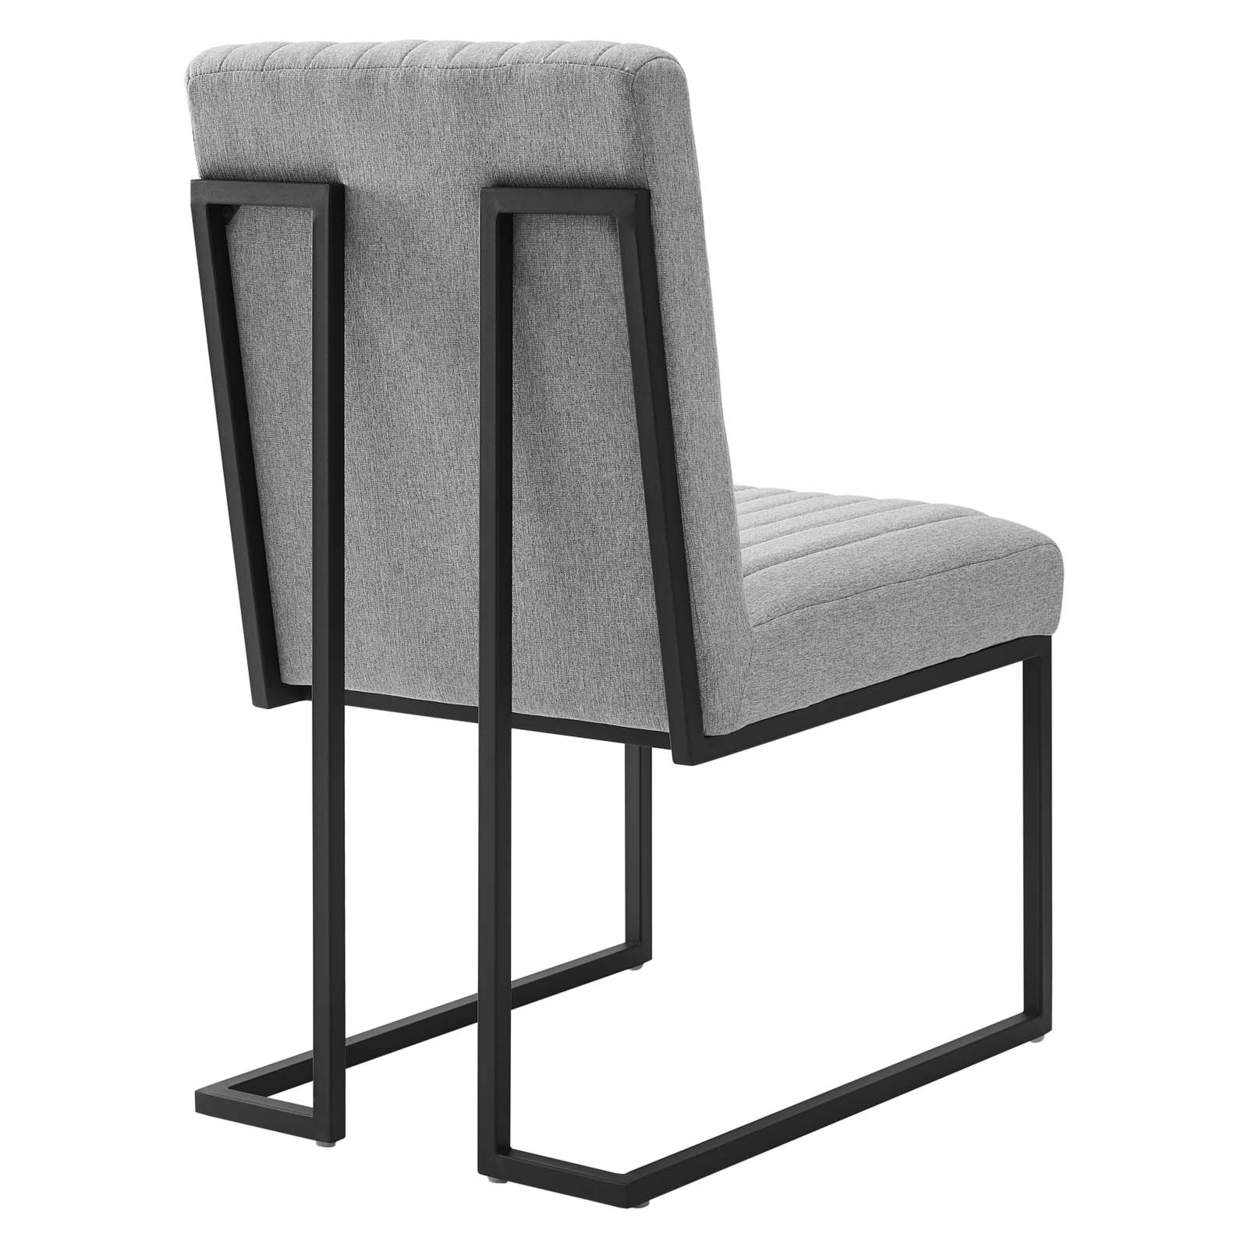 Indulge Channel Tufted Fabric Dining Chair, Light Gray